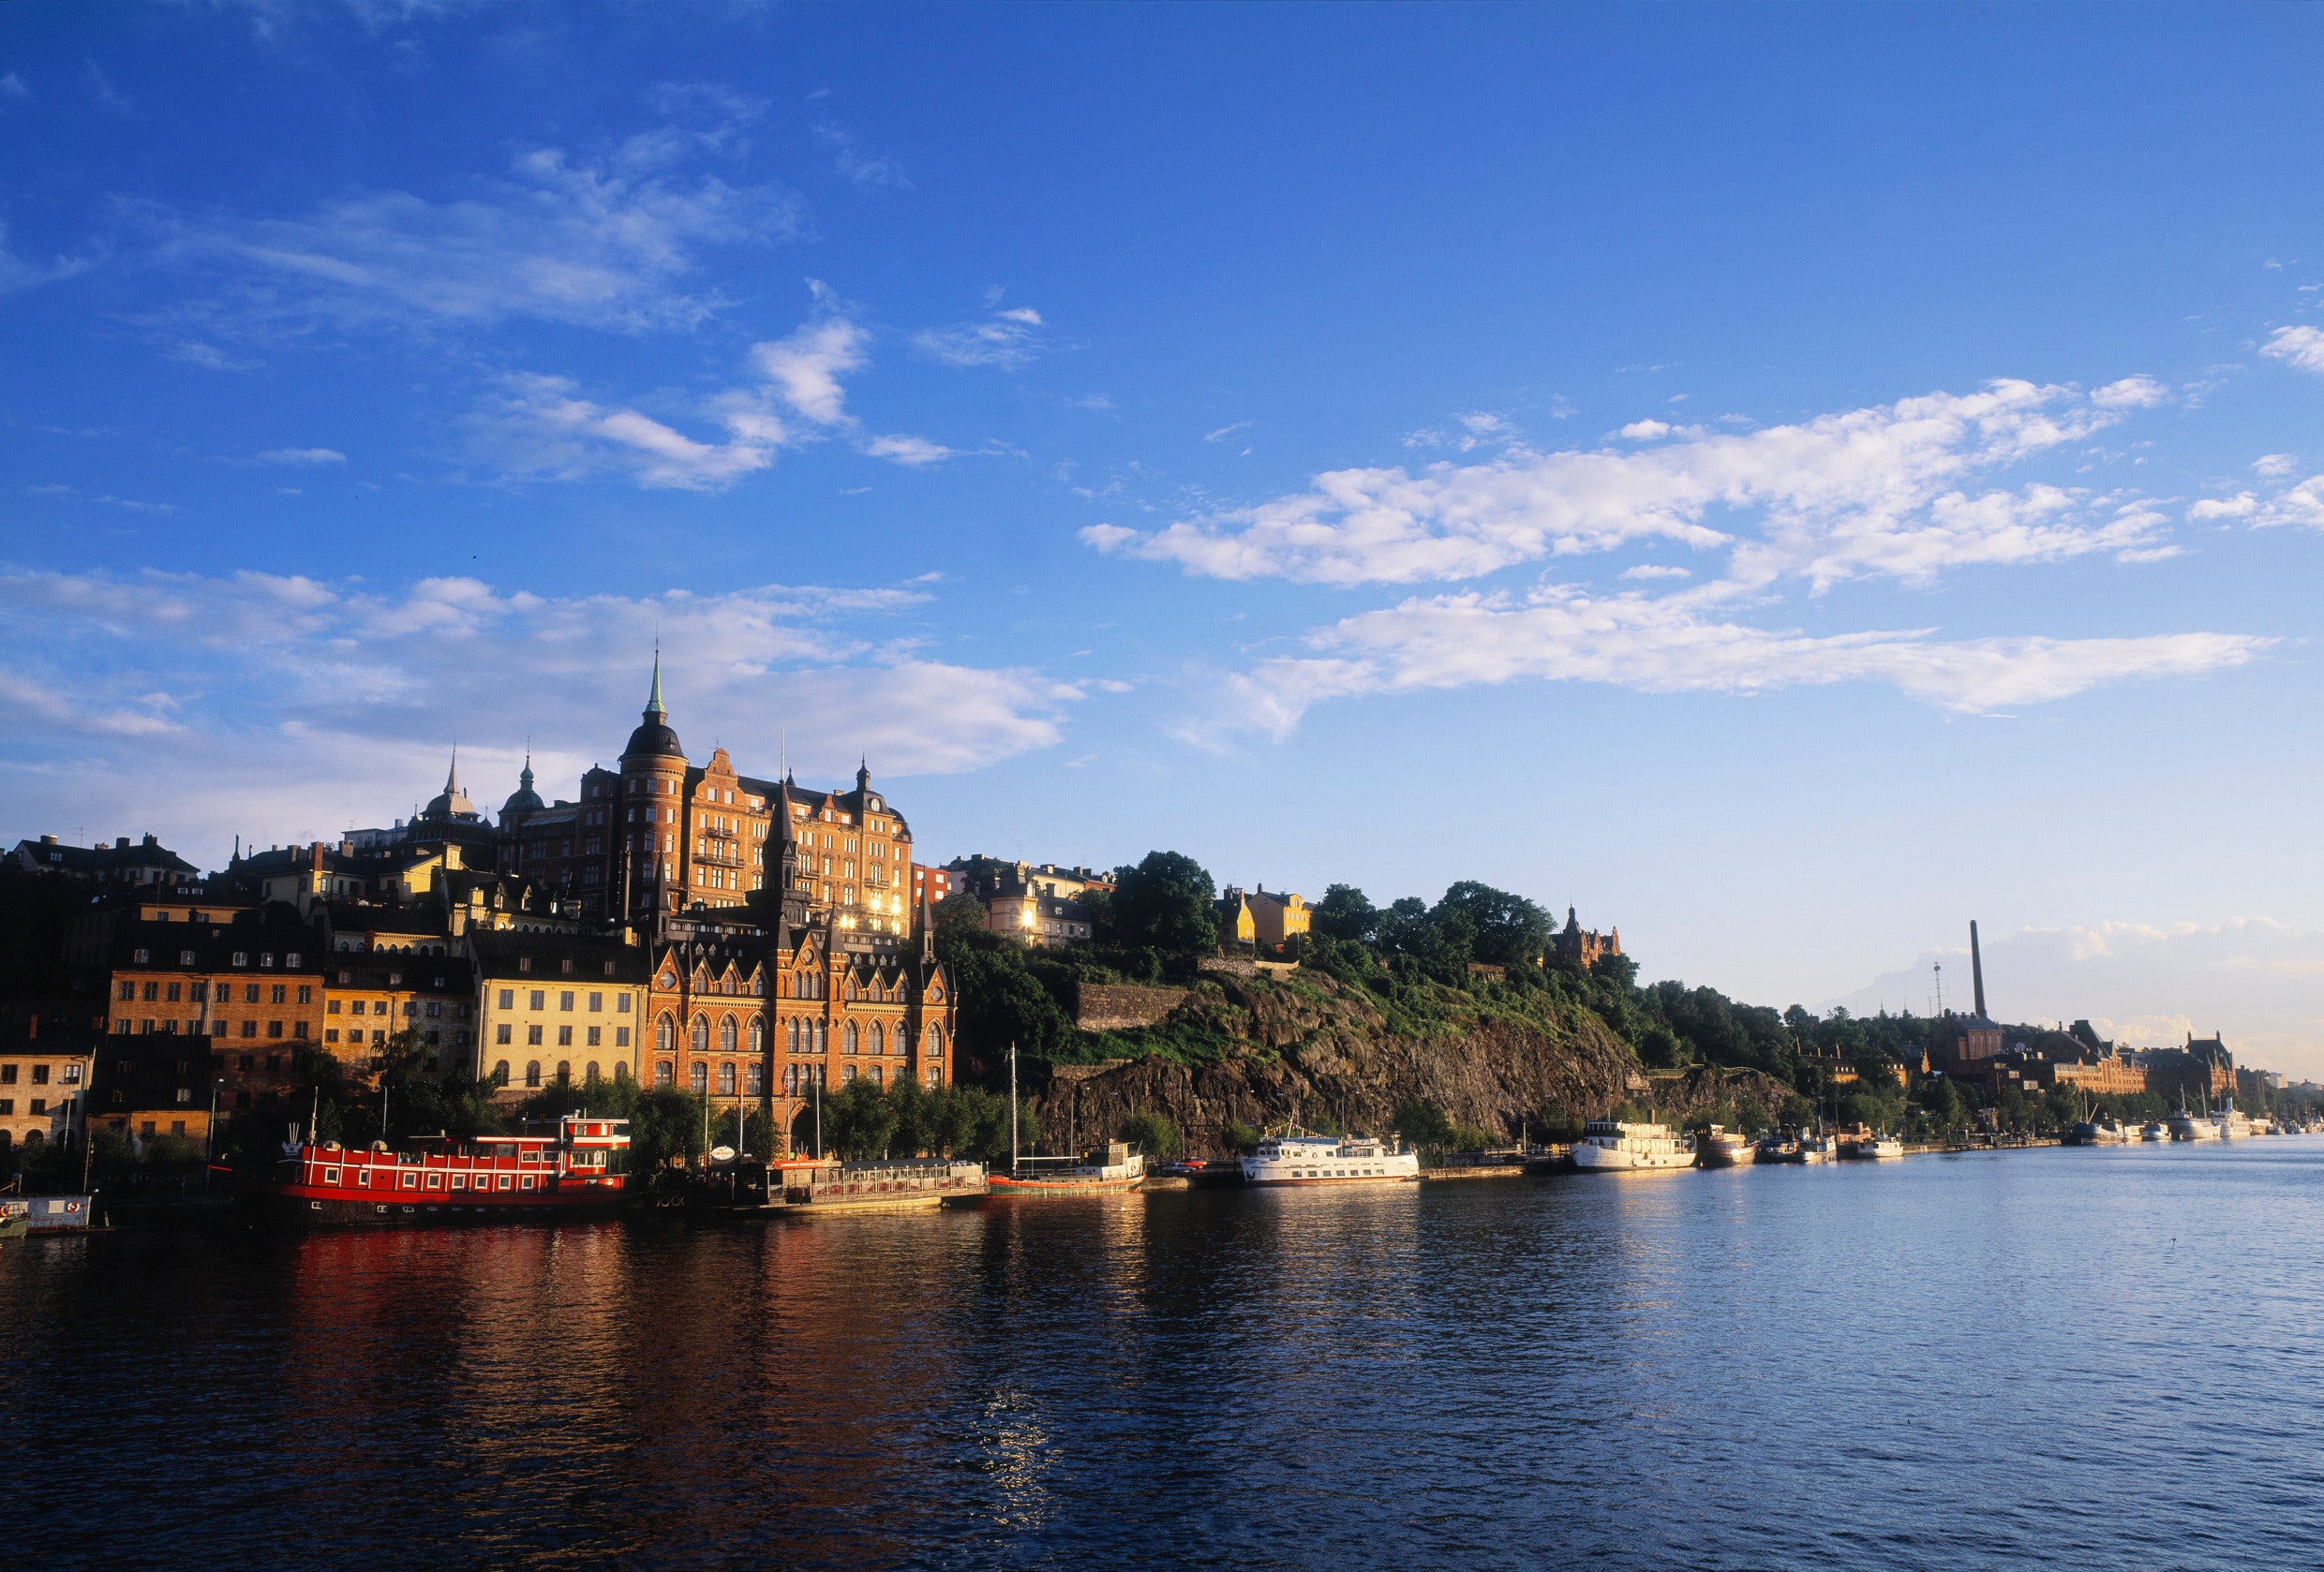 Sodermalm, Stockholm viewed from the water